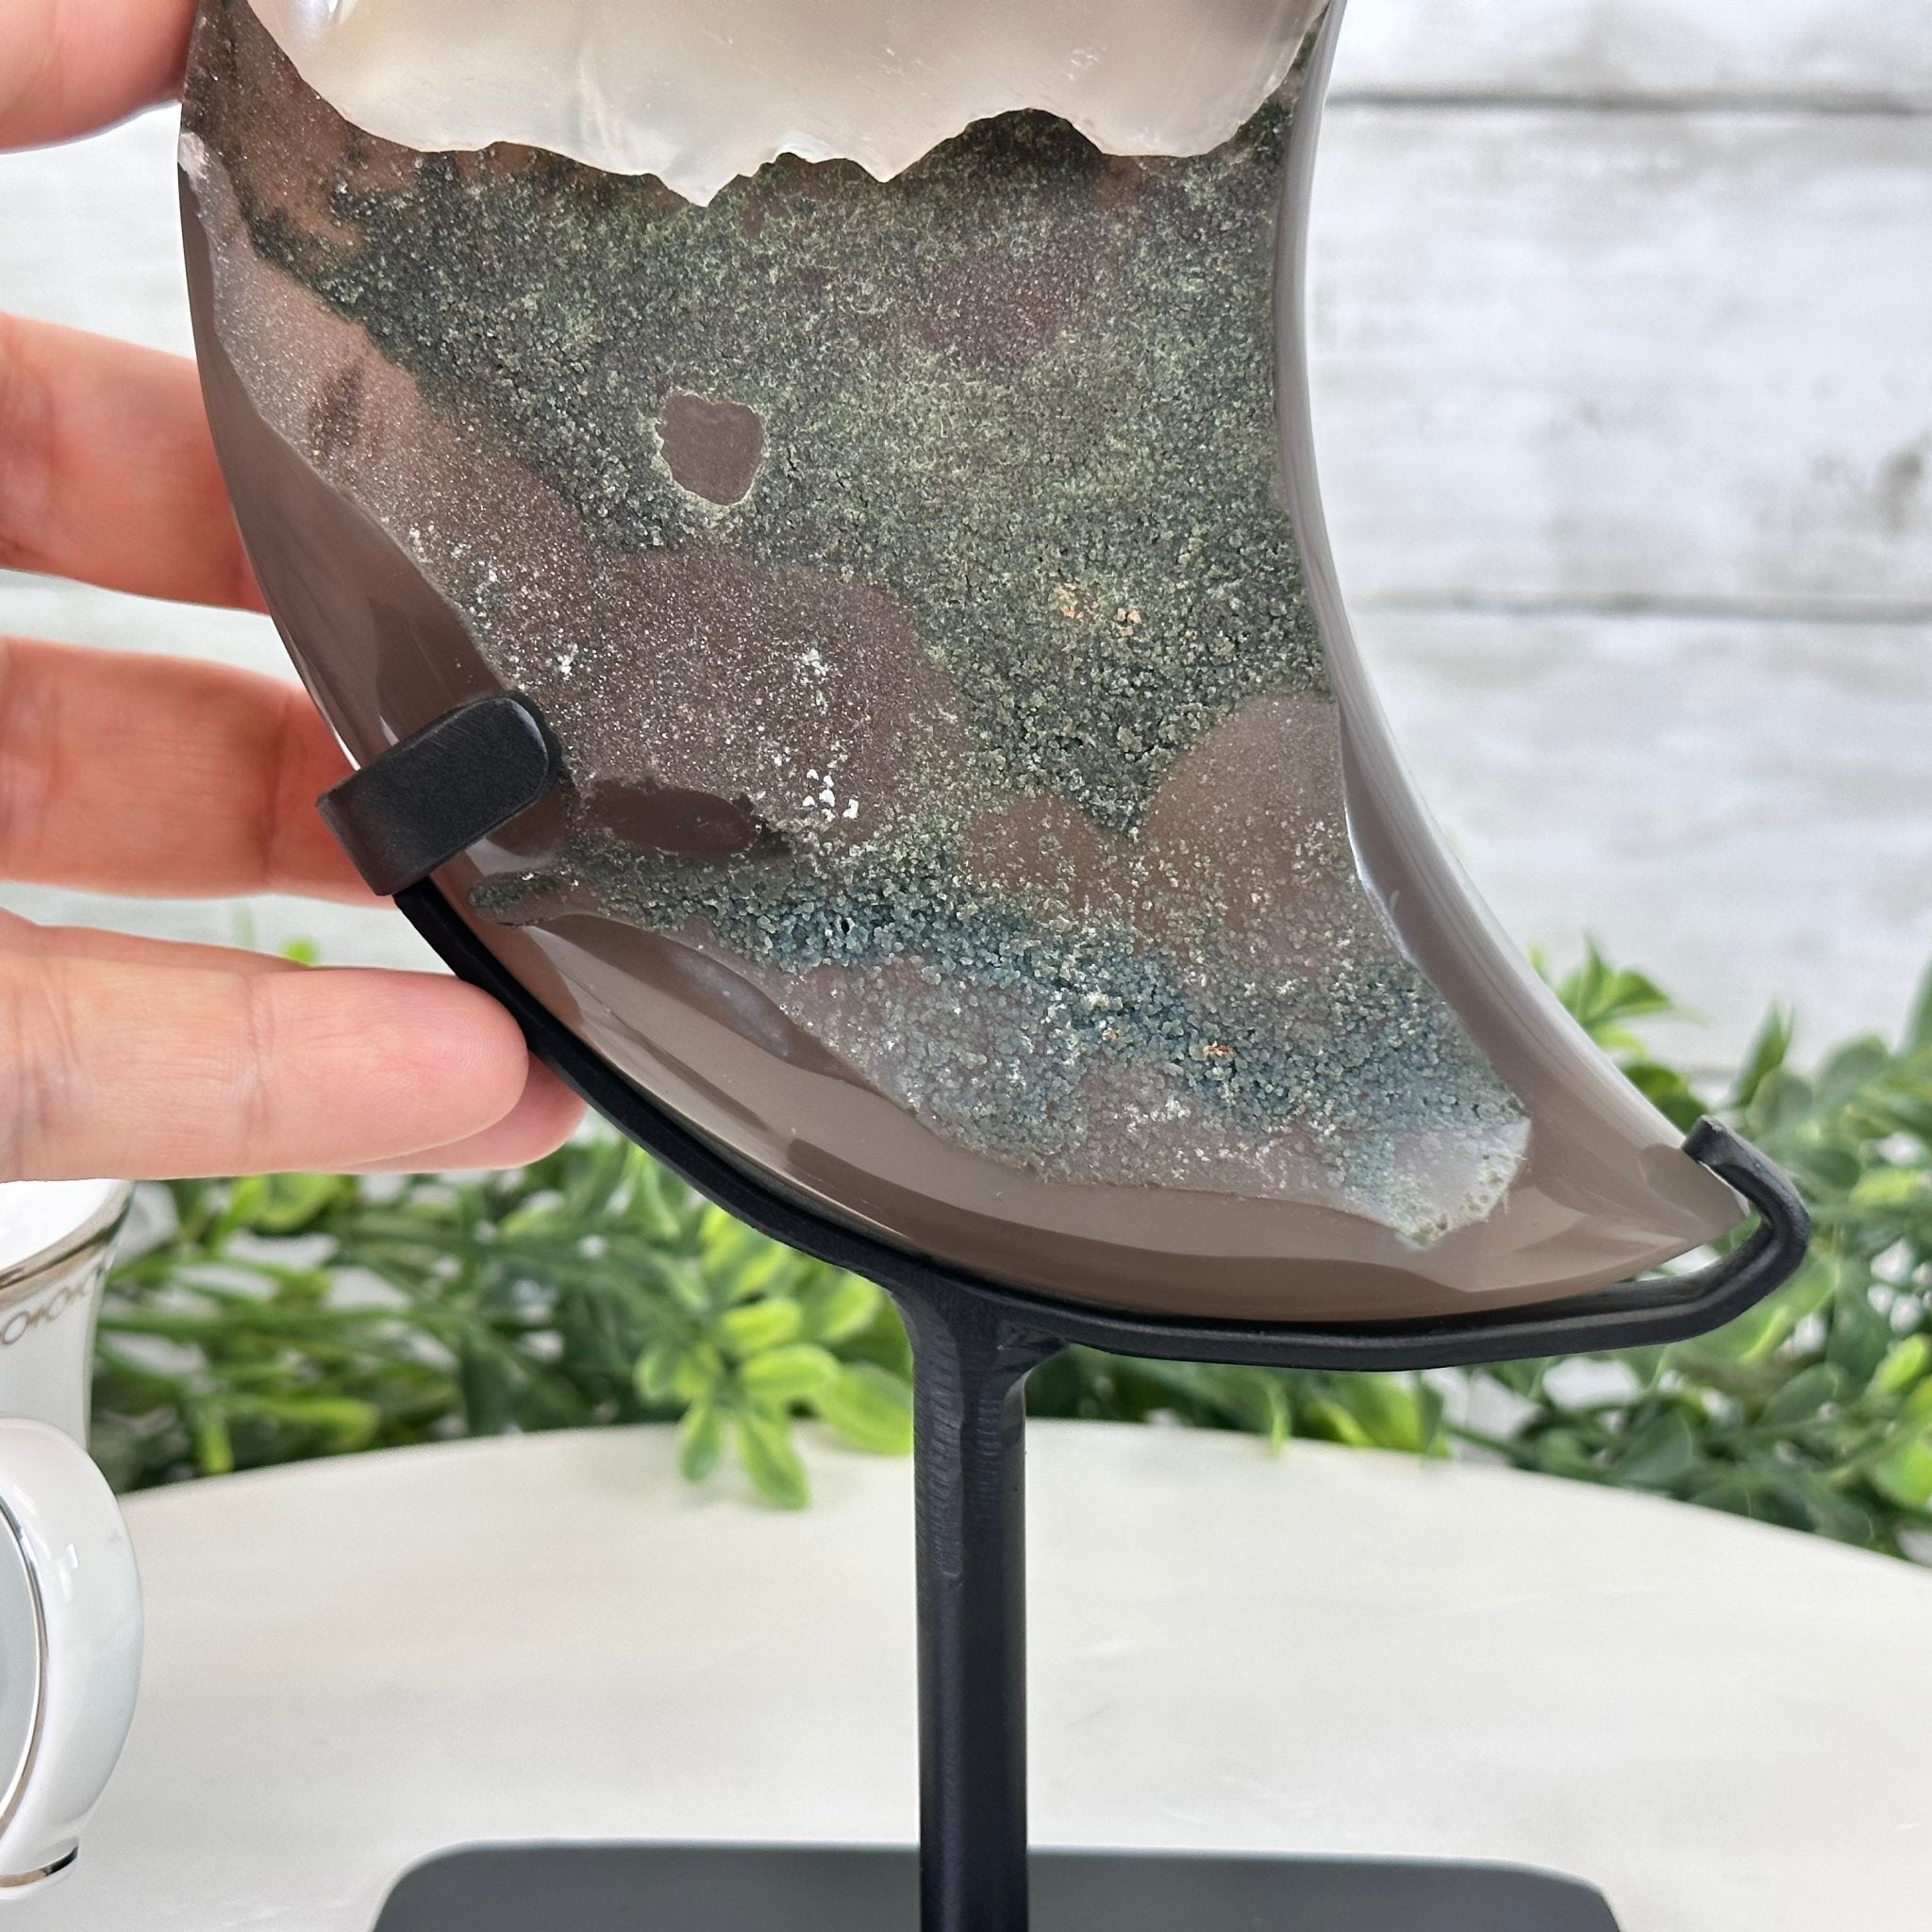 Polished Agate Crescent Moon on a Stand, 3.3 lbs & 10.25" Tall #5740NA-002 by Brazil Gems - Brazil GemsBrazil GemsPolished Agate Crescent Moon on a Stand, 3.3 lbs & 10.25" Tall #5740NA-002 by Brazil GemsCrescent Moons5740NA-002